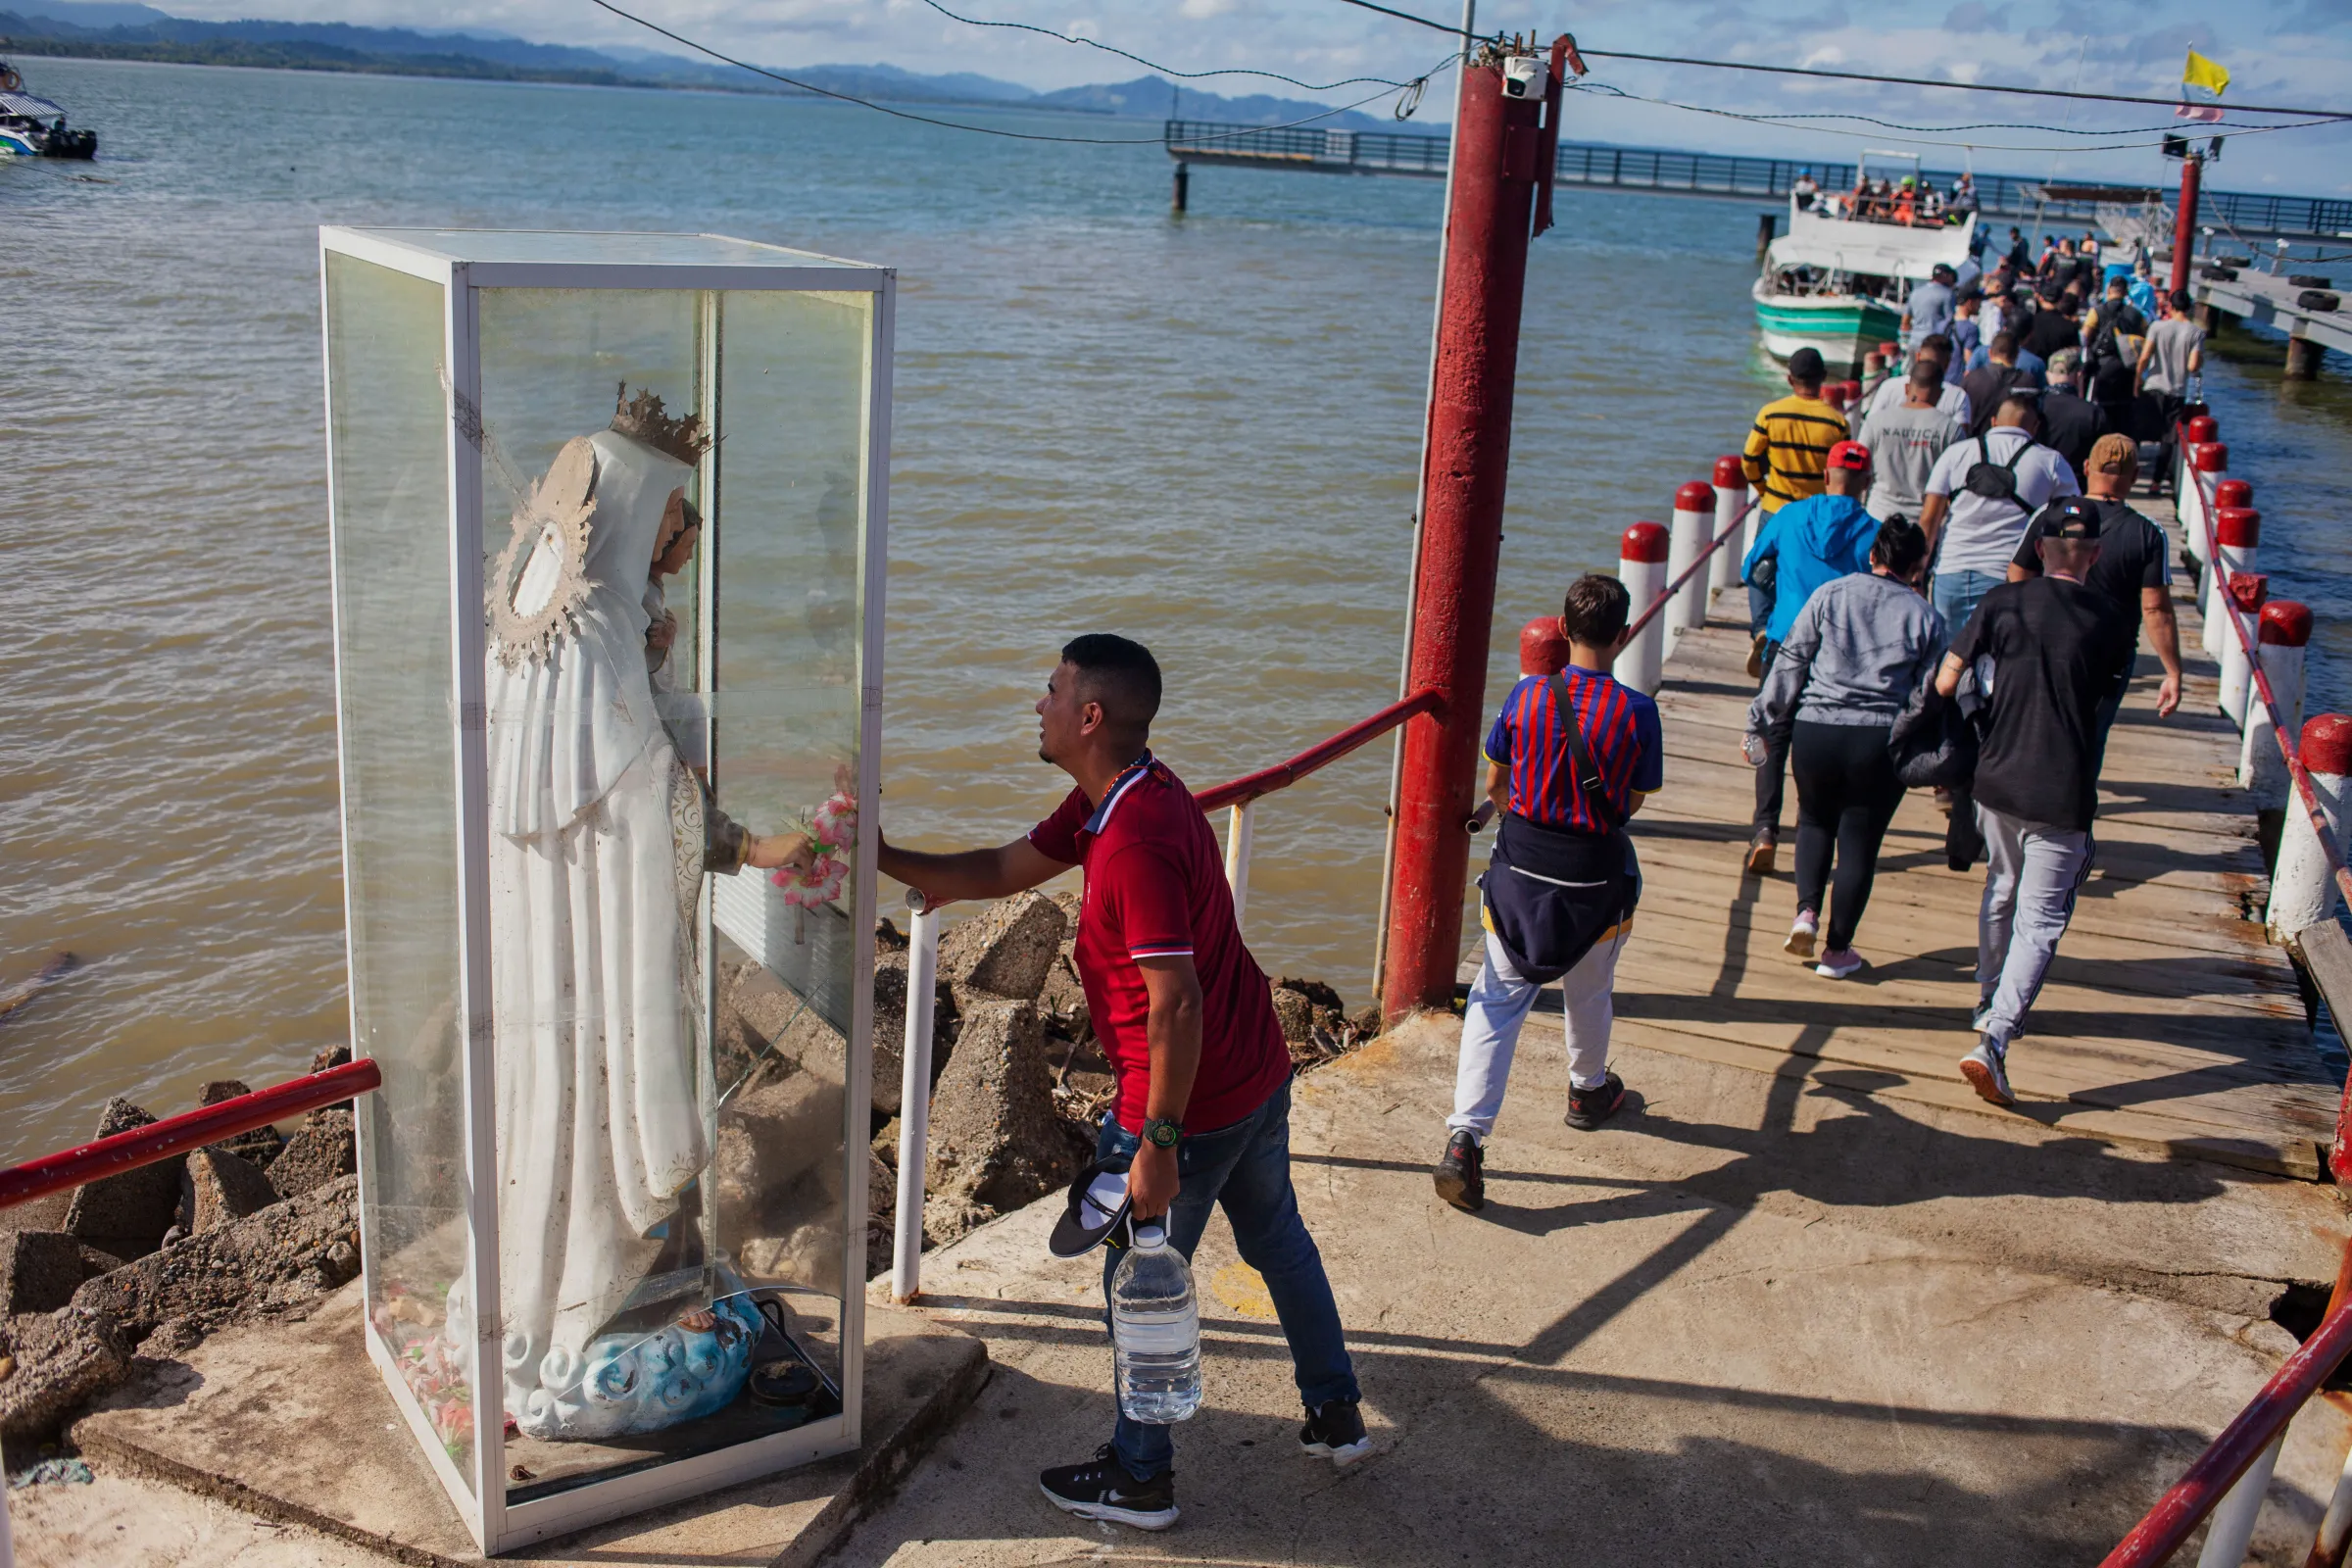 Migrants from Venezuela, Haiti, and parts of Africa and Asia walk along the pier in Necoclí to board a tourist boat to cross the Gulf of Urabá to reach Capurganá from where the jungle trek begins. Necoclí, Colombia, July 26, 2022. Thomson Reuters Foundation/Fabio Cuttica